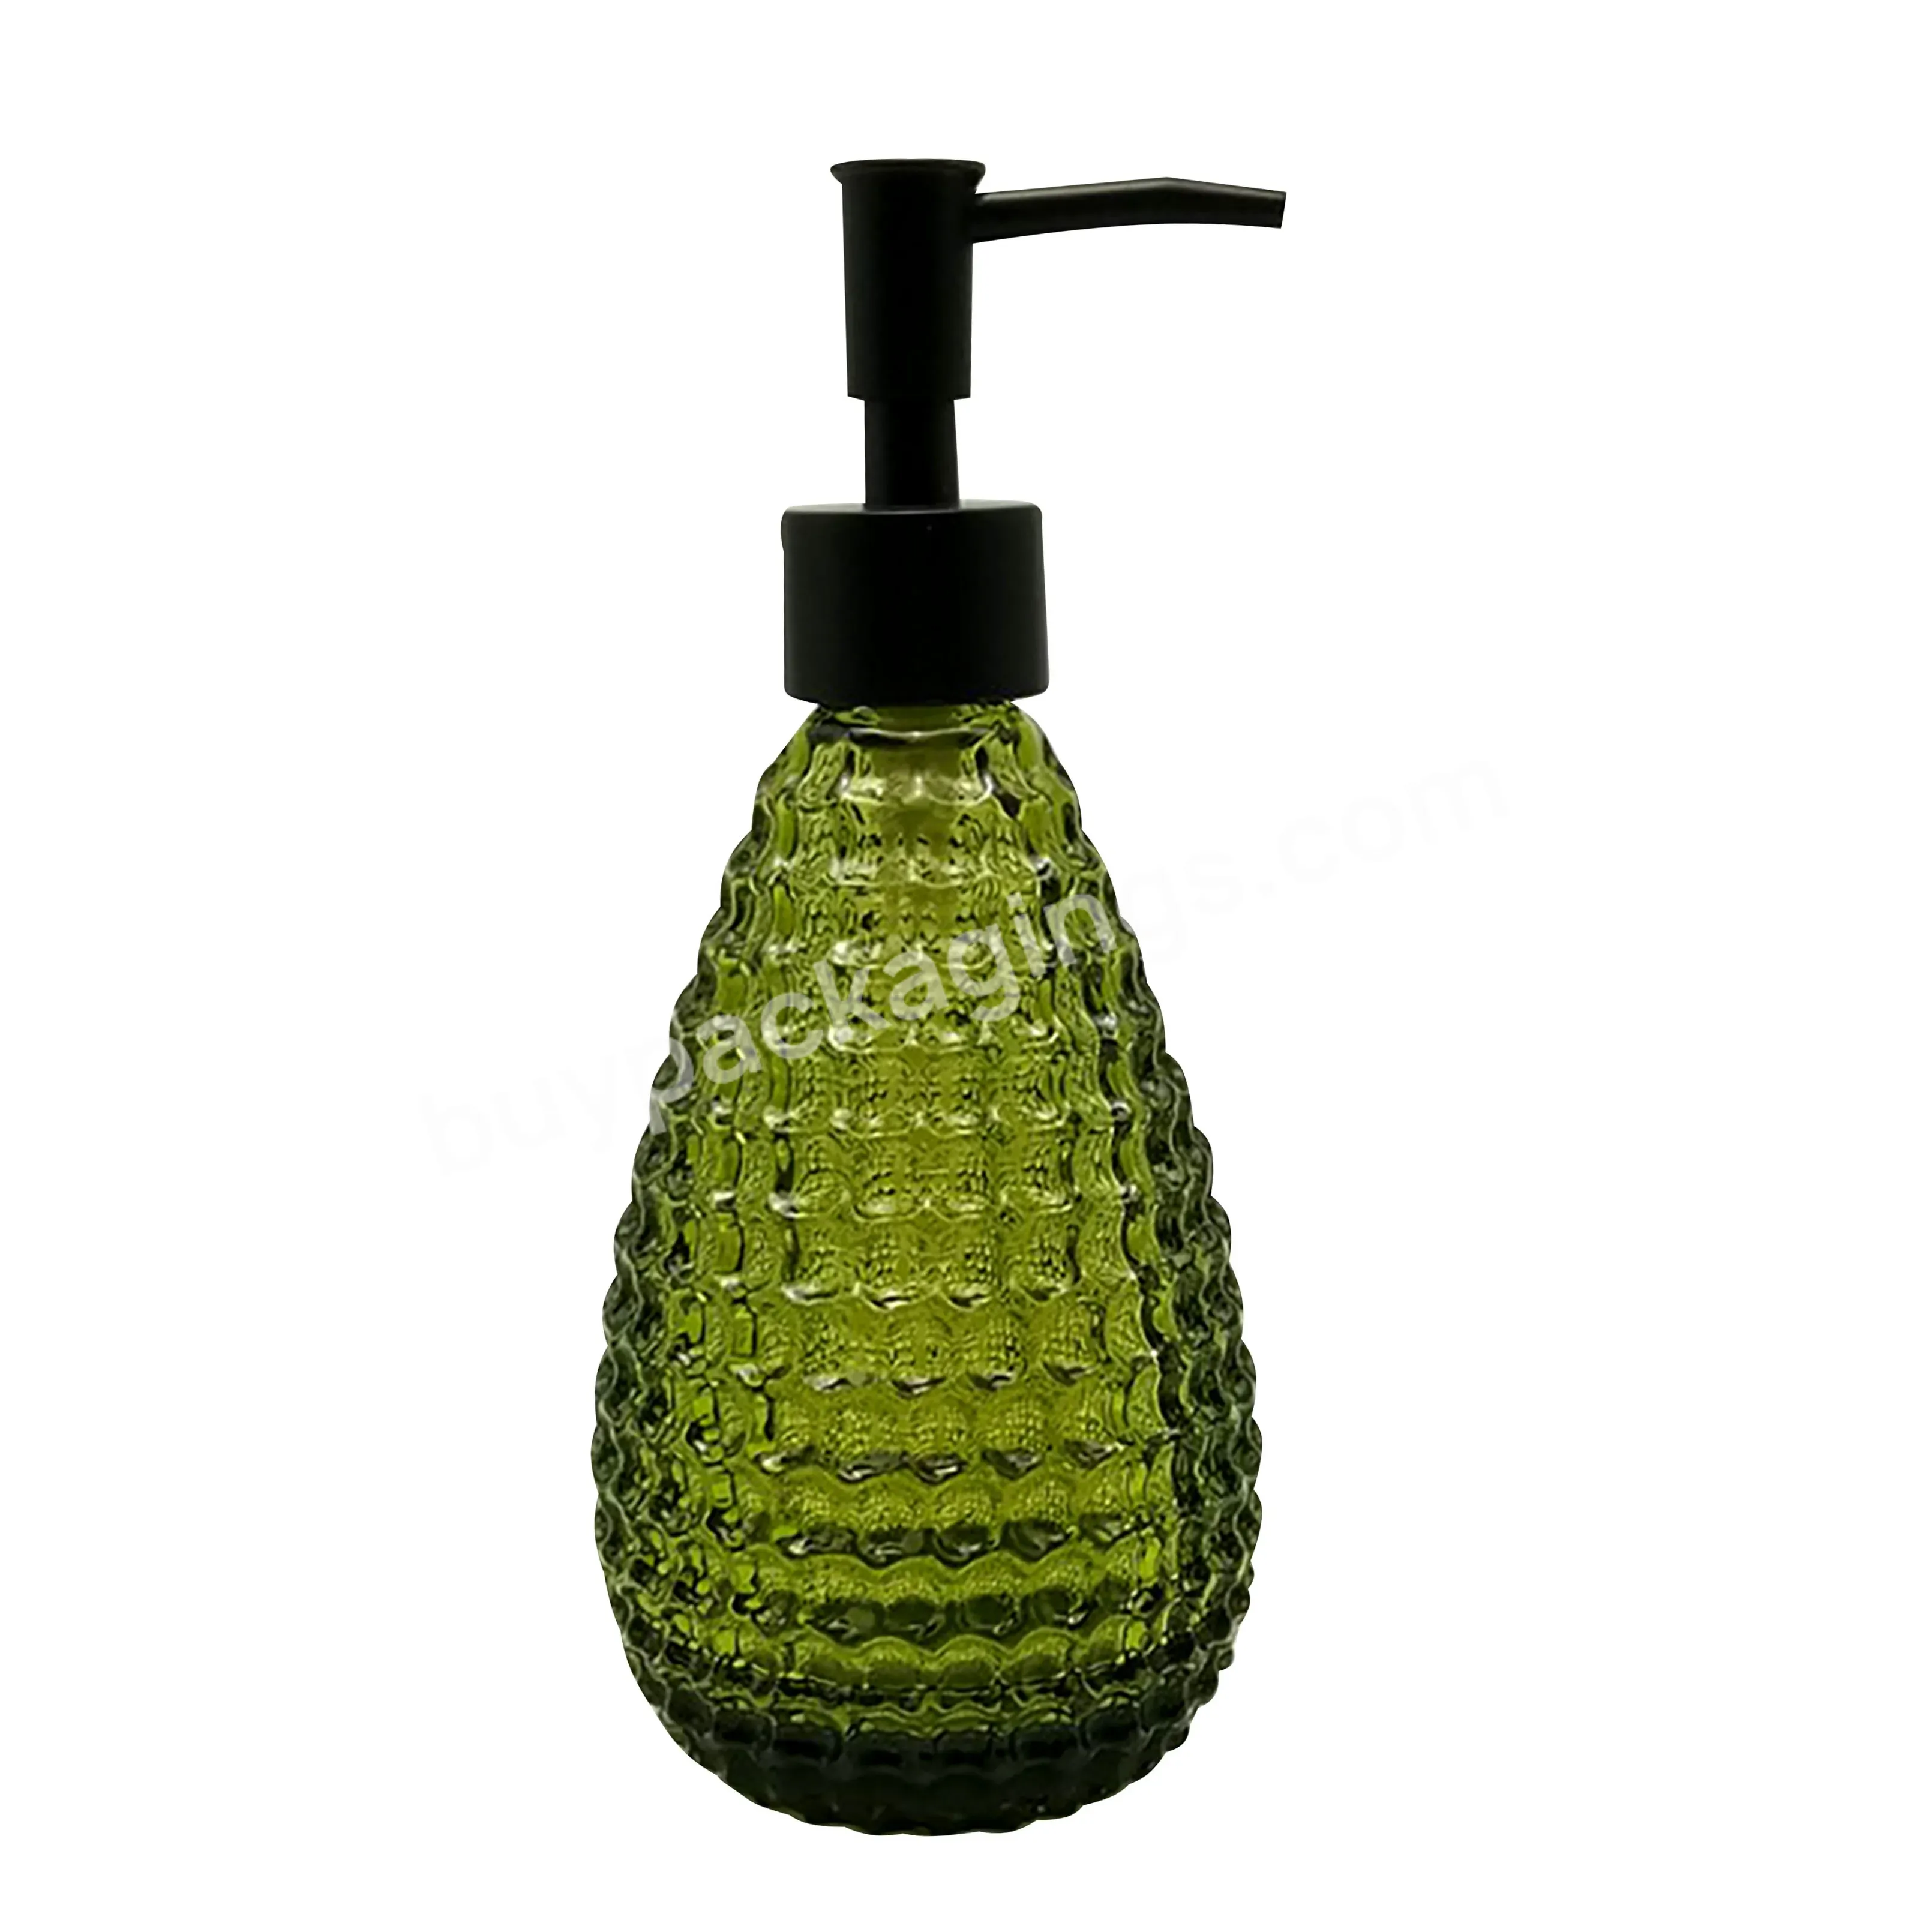 New Green Utensil Vintage Embossed Glass Hand Sanitizer Bottle Colored Glass Mouthwash Cup - Buy New Utensil Green Vintage Embossed Glass Bottle,Hand Sanitizer Bottle,Colored Glass Mouthwash Cup.